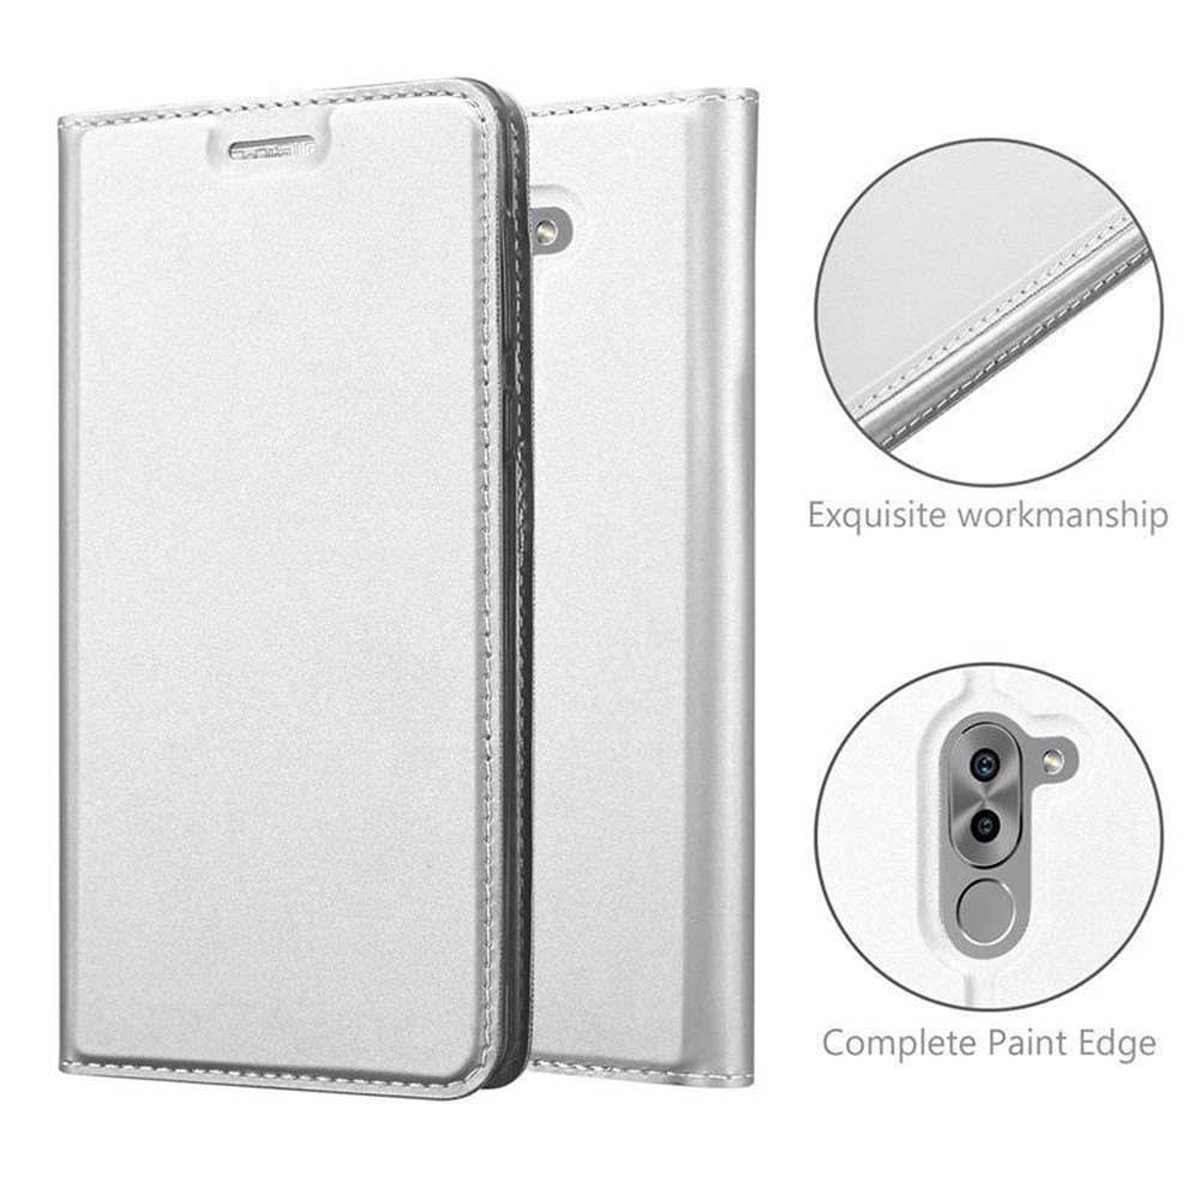 CLASSY Book CADORABO LITE / MATE 6X, Style, Honor Classy SILBER Huawei, Handyhülle GR5 / 9 Bookcover, 2017